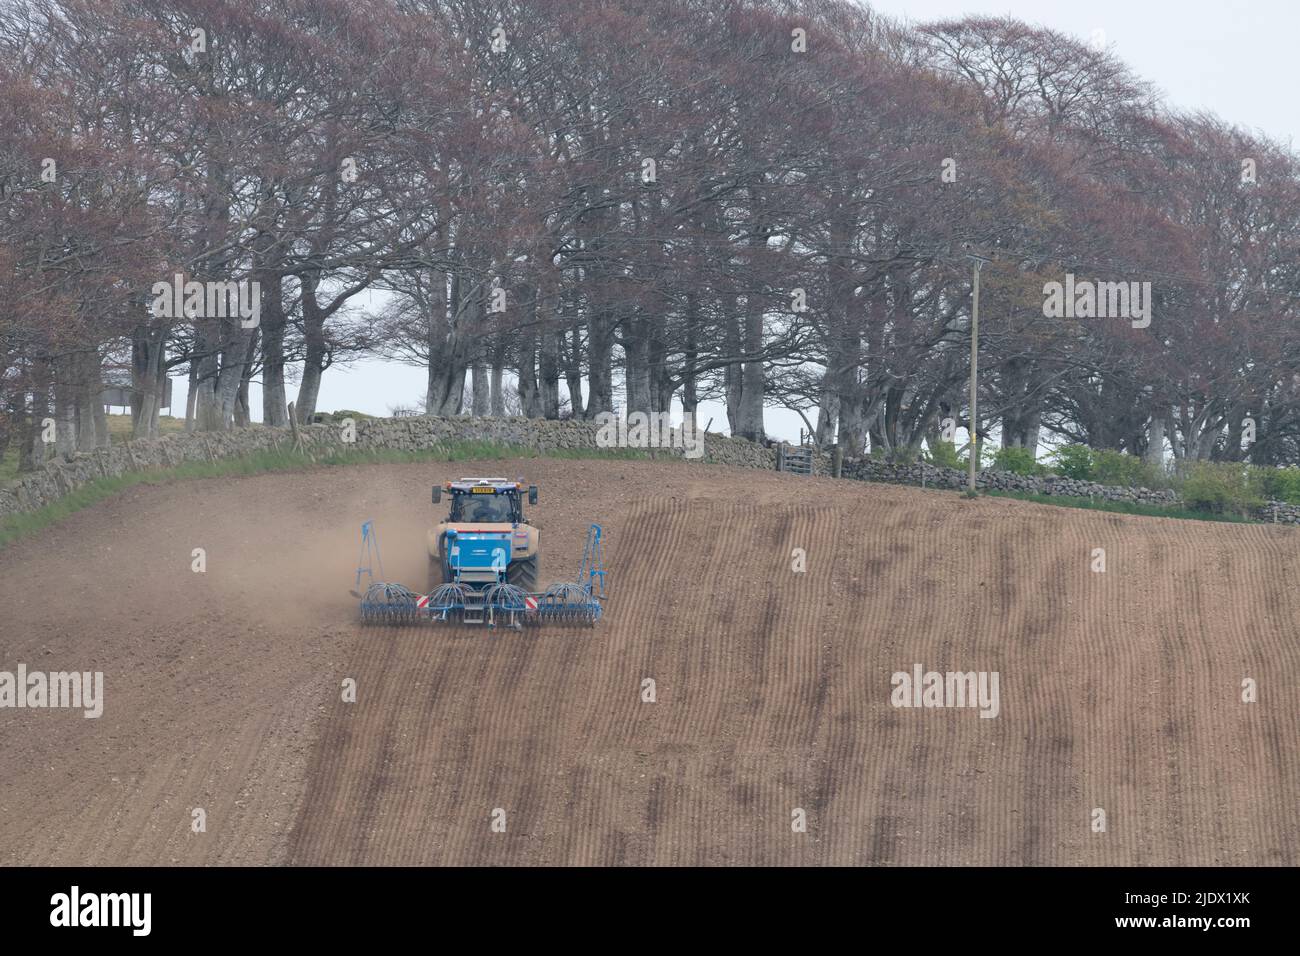 A Rear View of a Tractor & Lemken Pneumatic Seed Drill on a Hillside in Spring with Beech Trees (Fagus Sylvatica) & Drystane Dyke in the Background Stock Photo